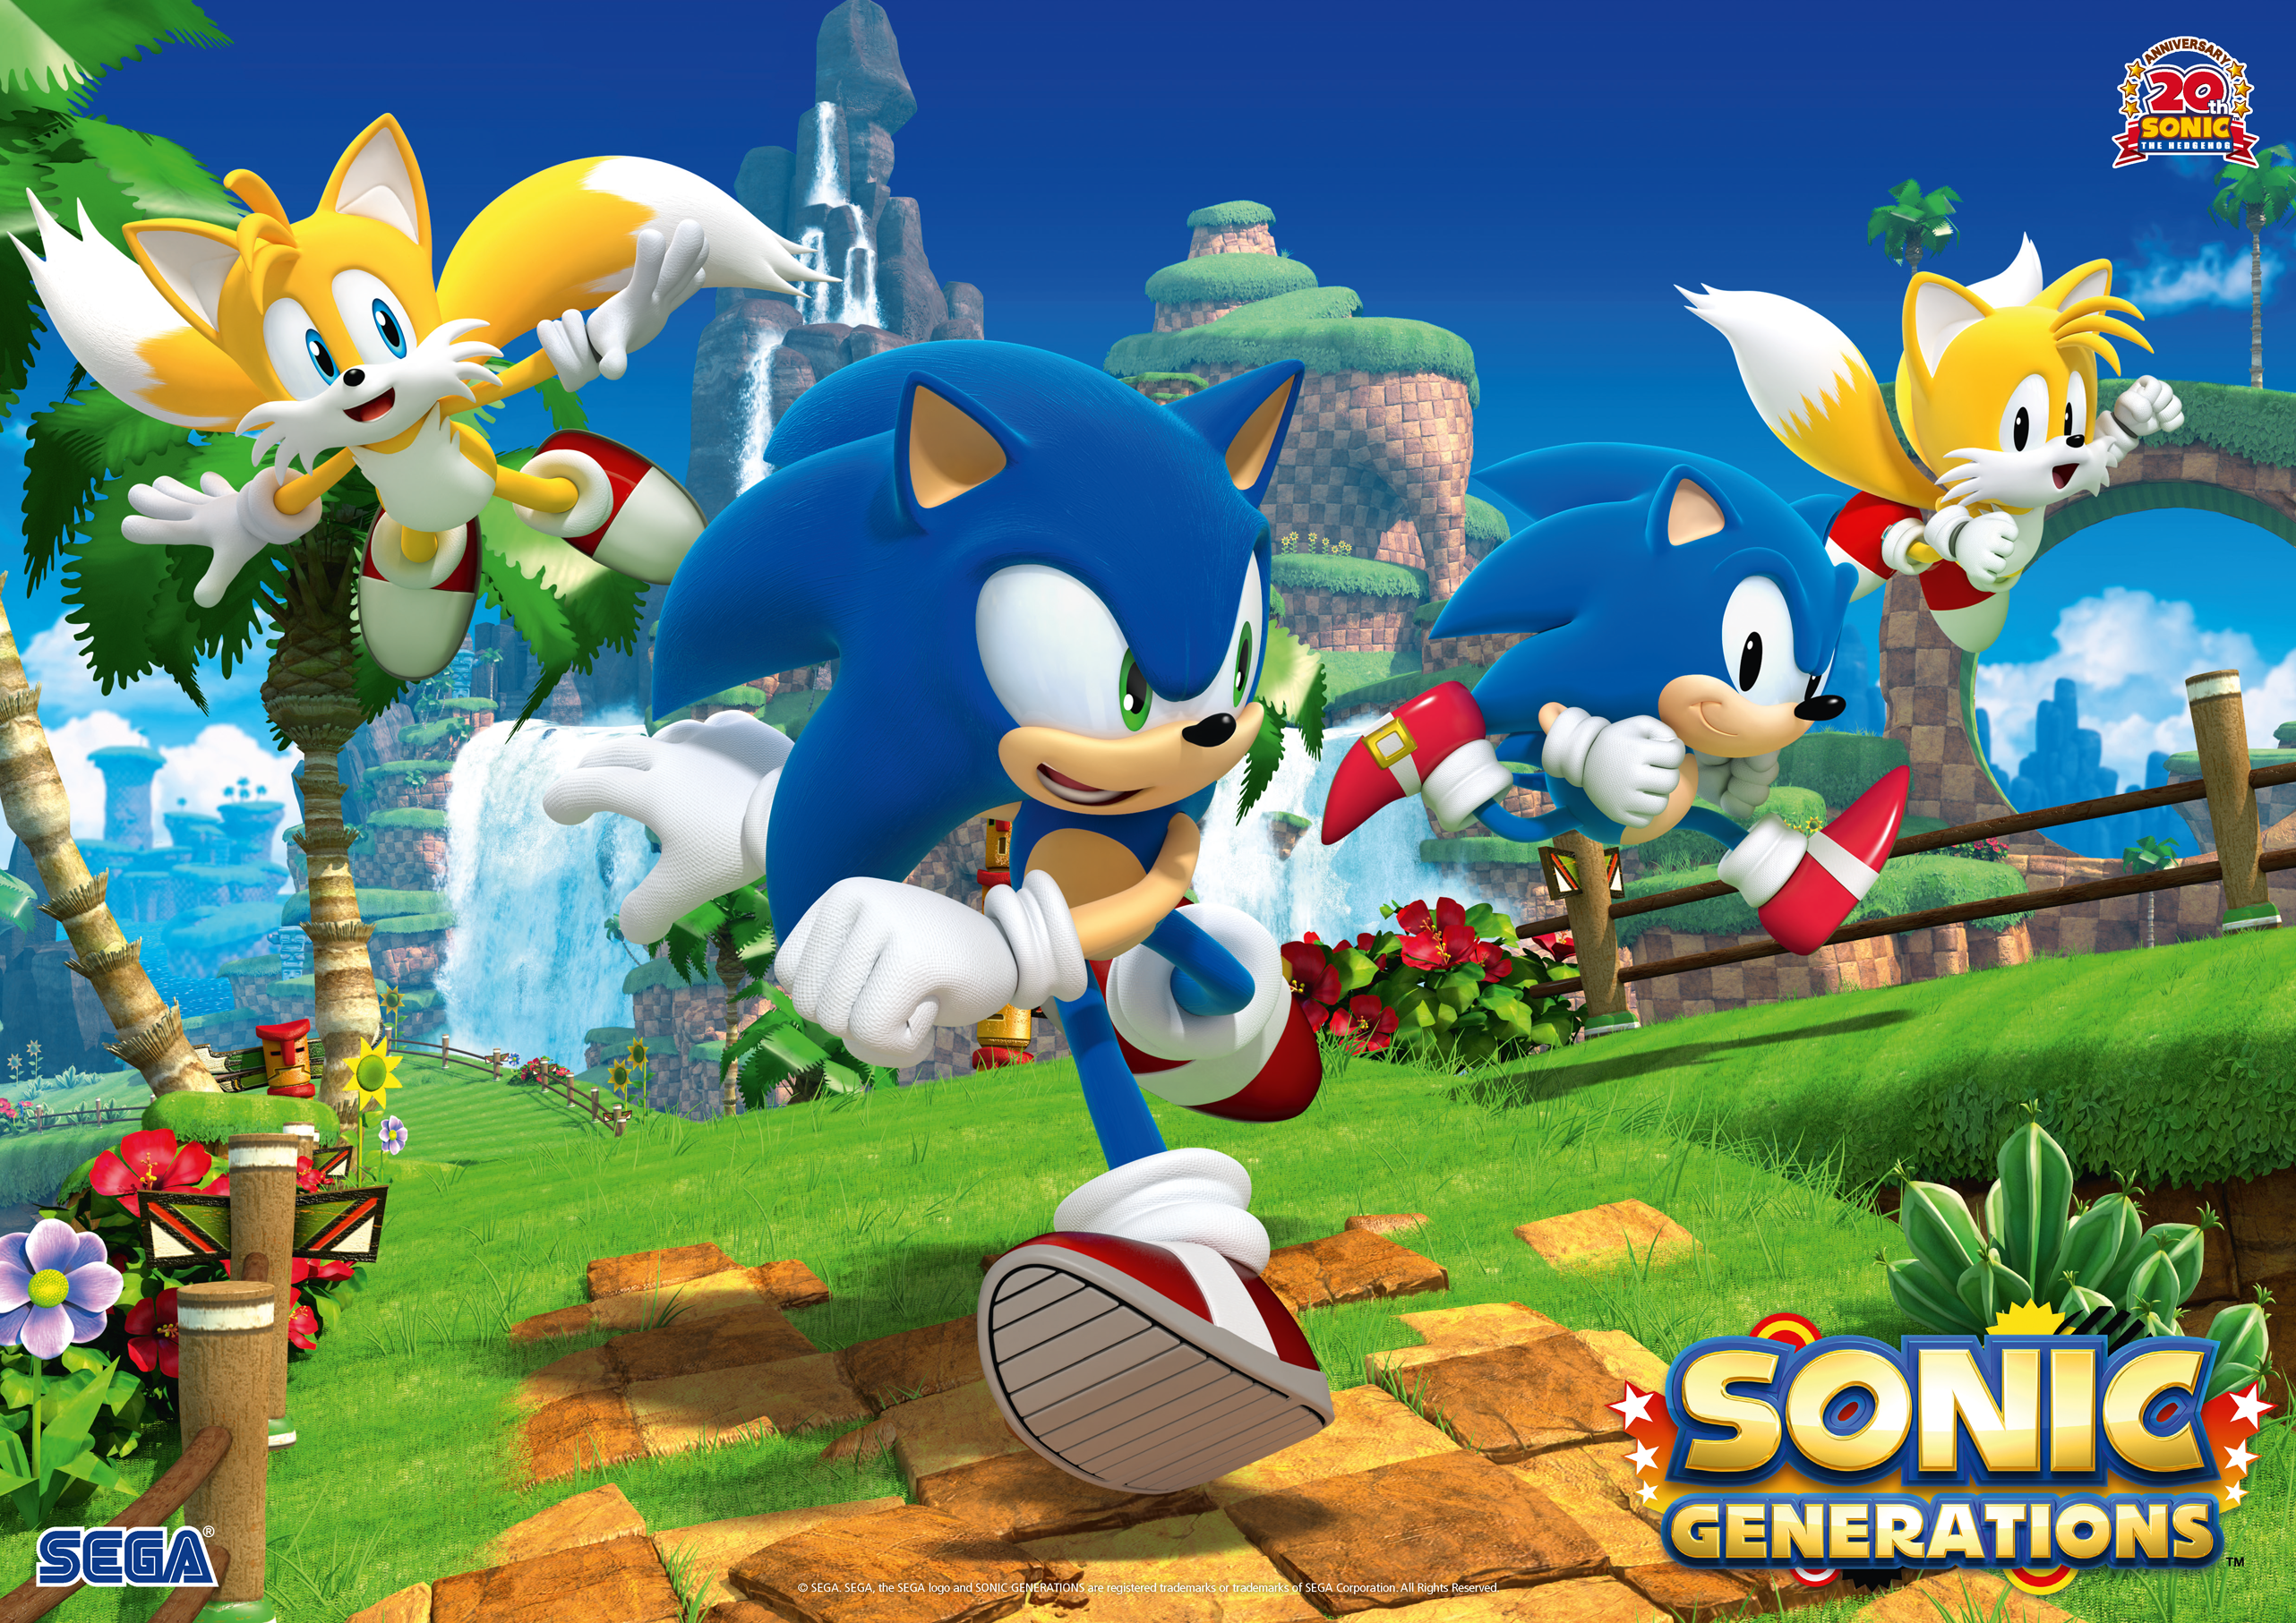 Games with Gold: Sonic Generations and Shantae Half-Genie Hero are